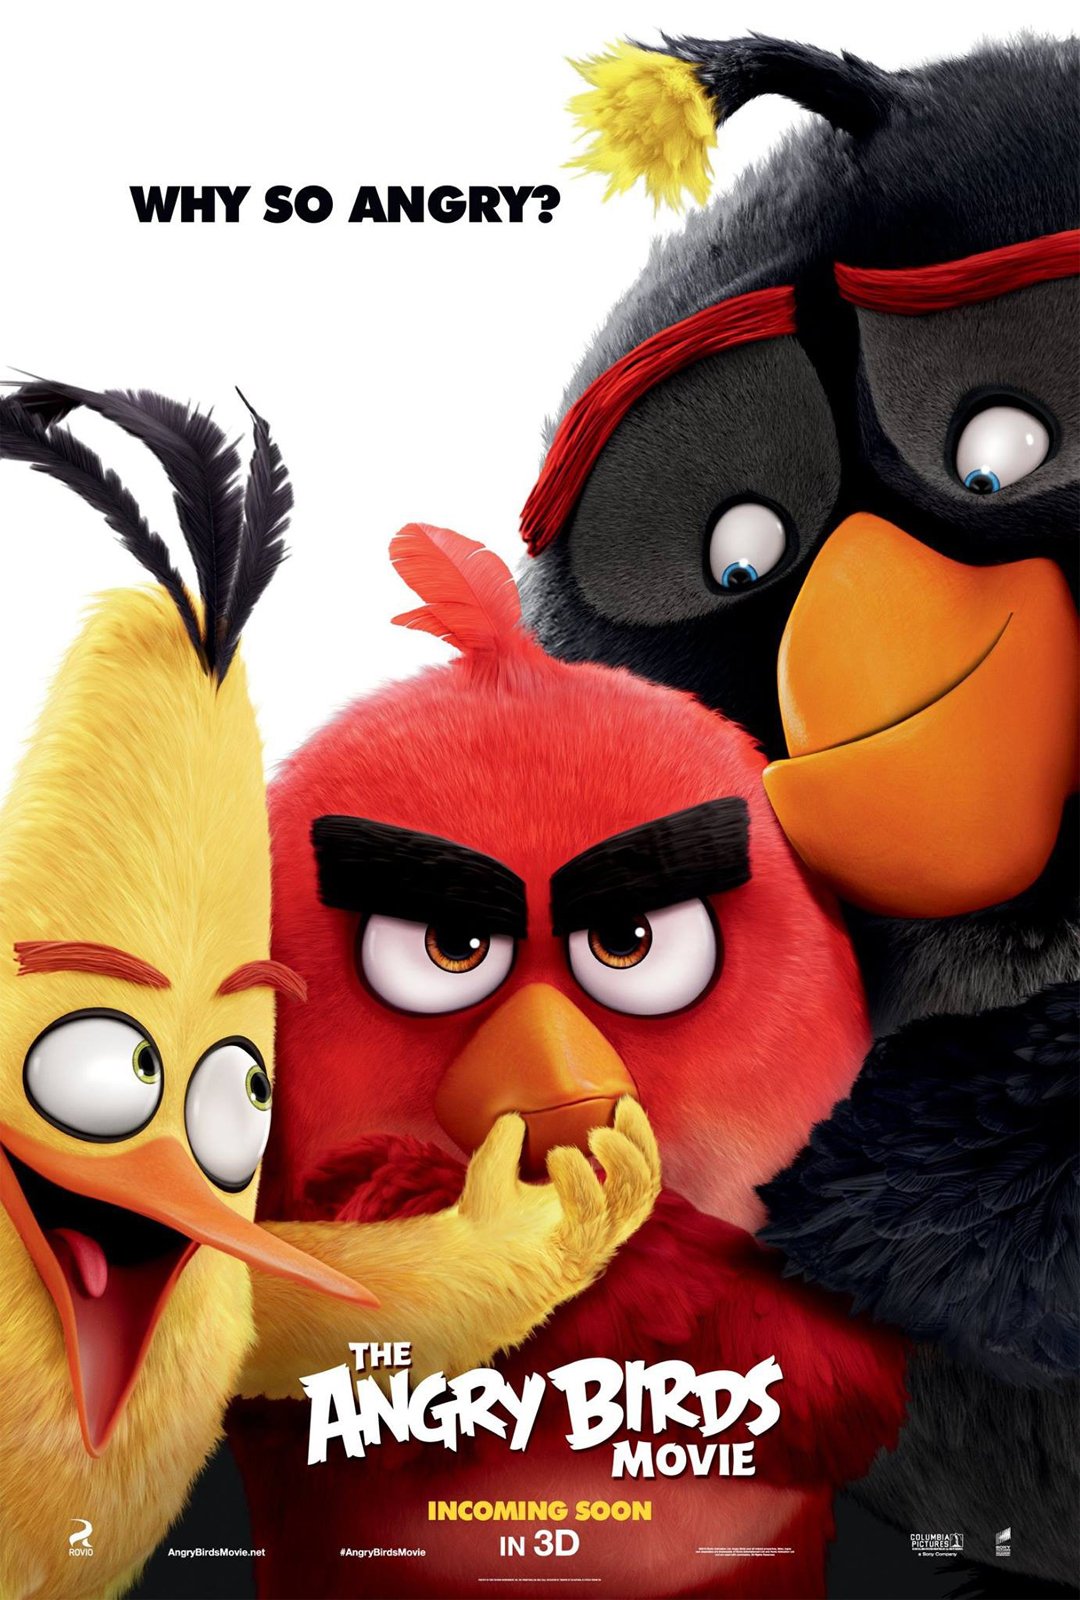 Angry Birds Copains comme cochons Bande annonce VF 2019 